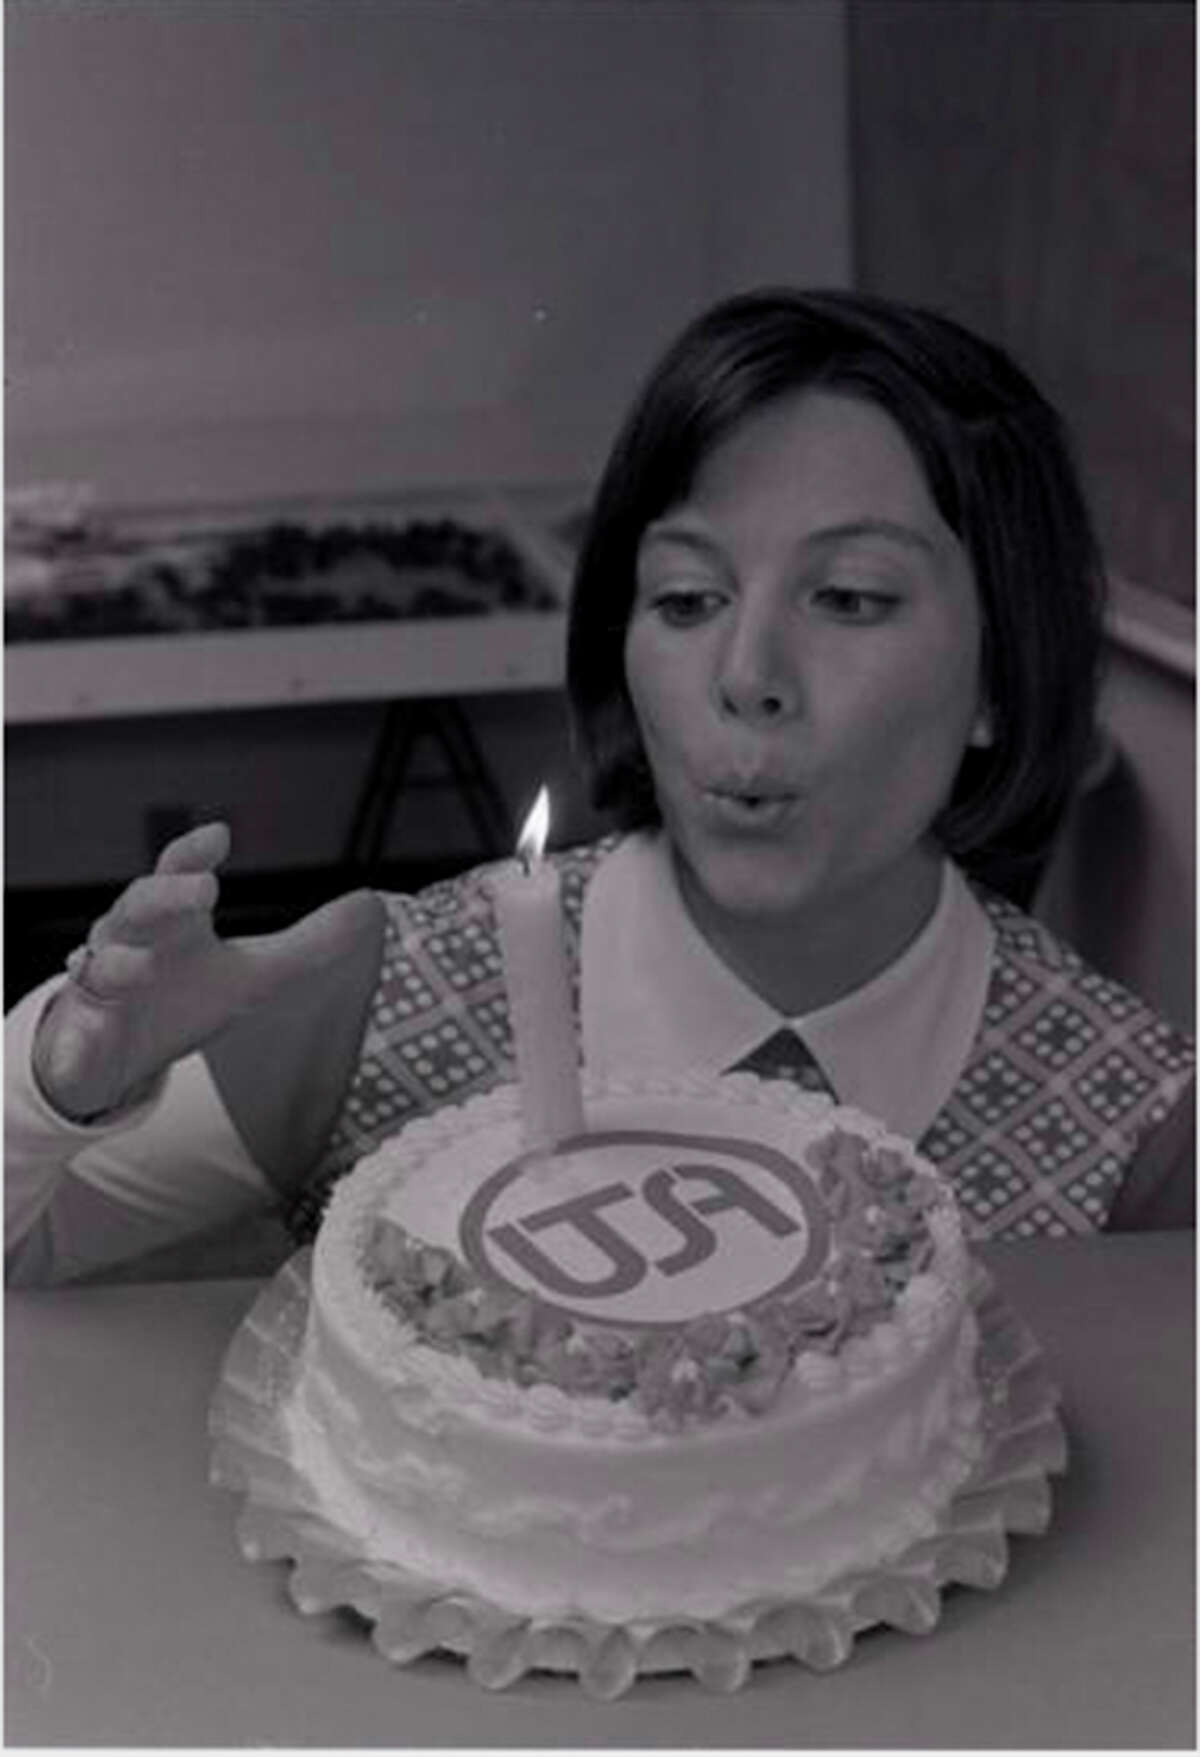 Peggy Tholen, the first student admitted to UTSA, celebrates UTSA's first year of classes in 1974.